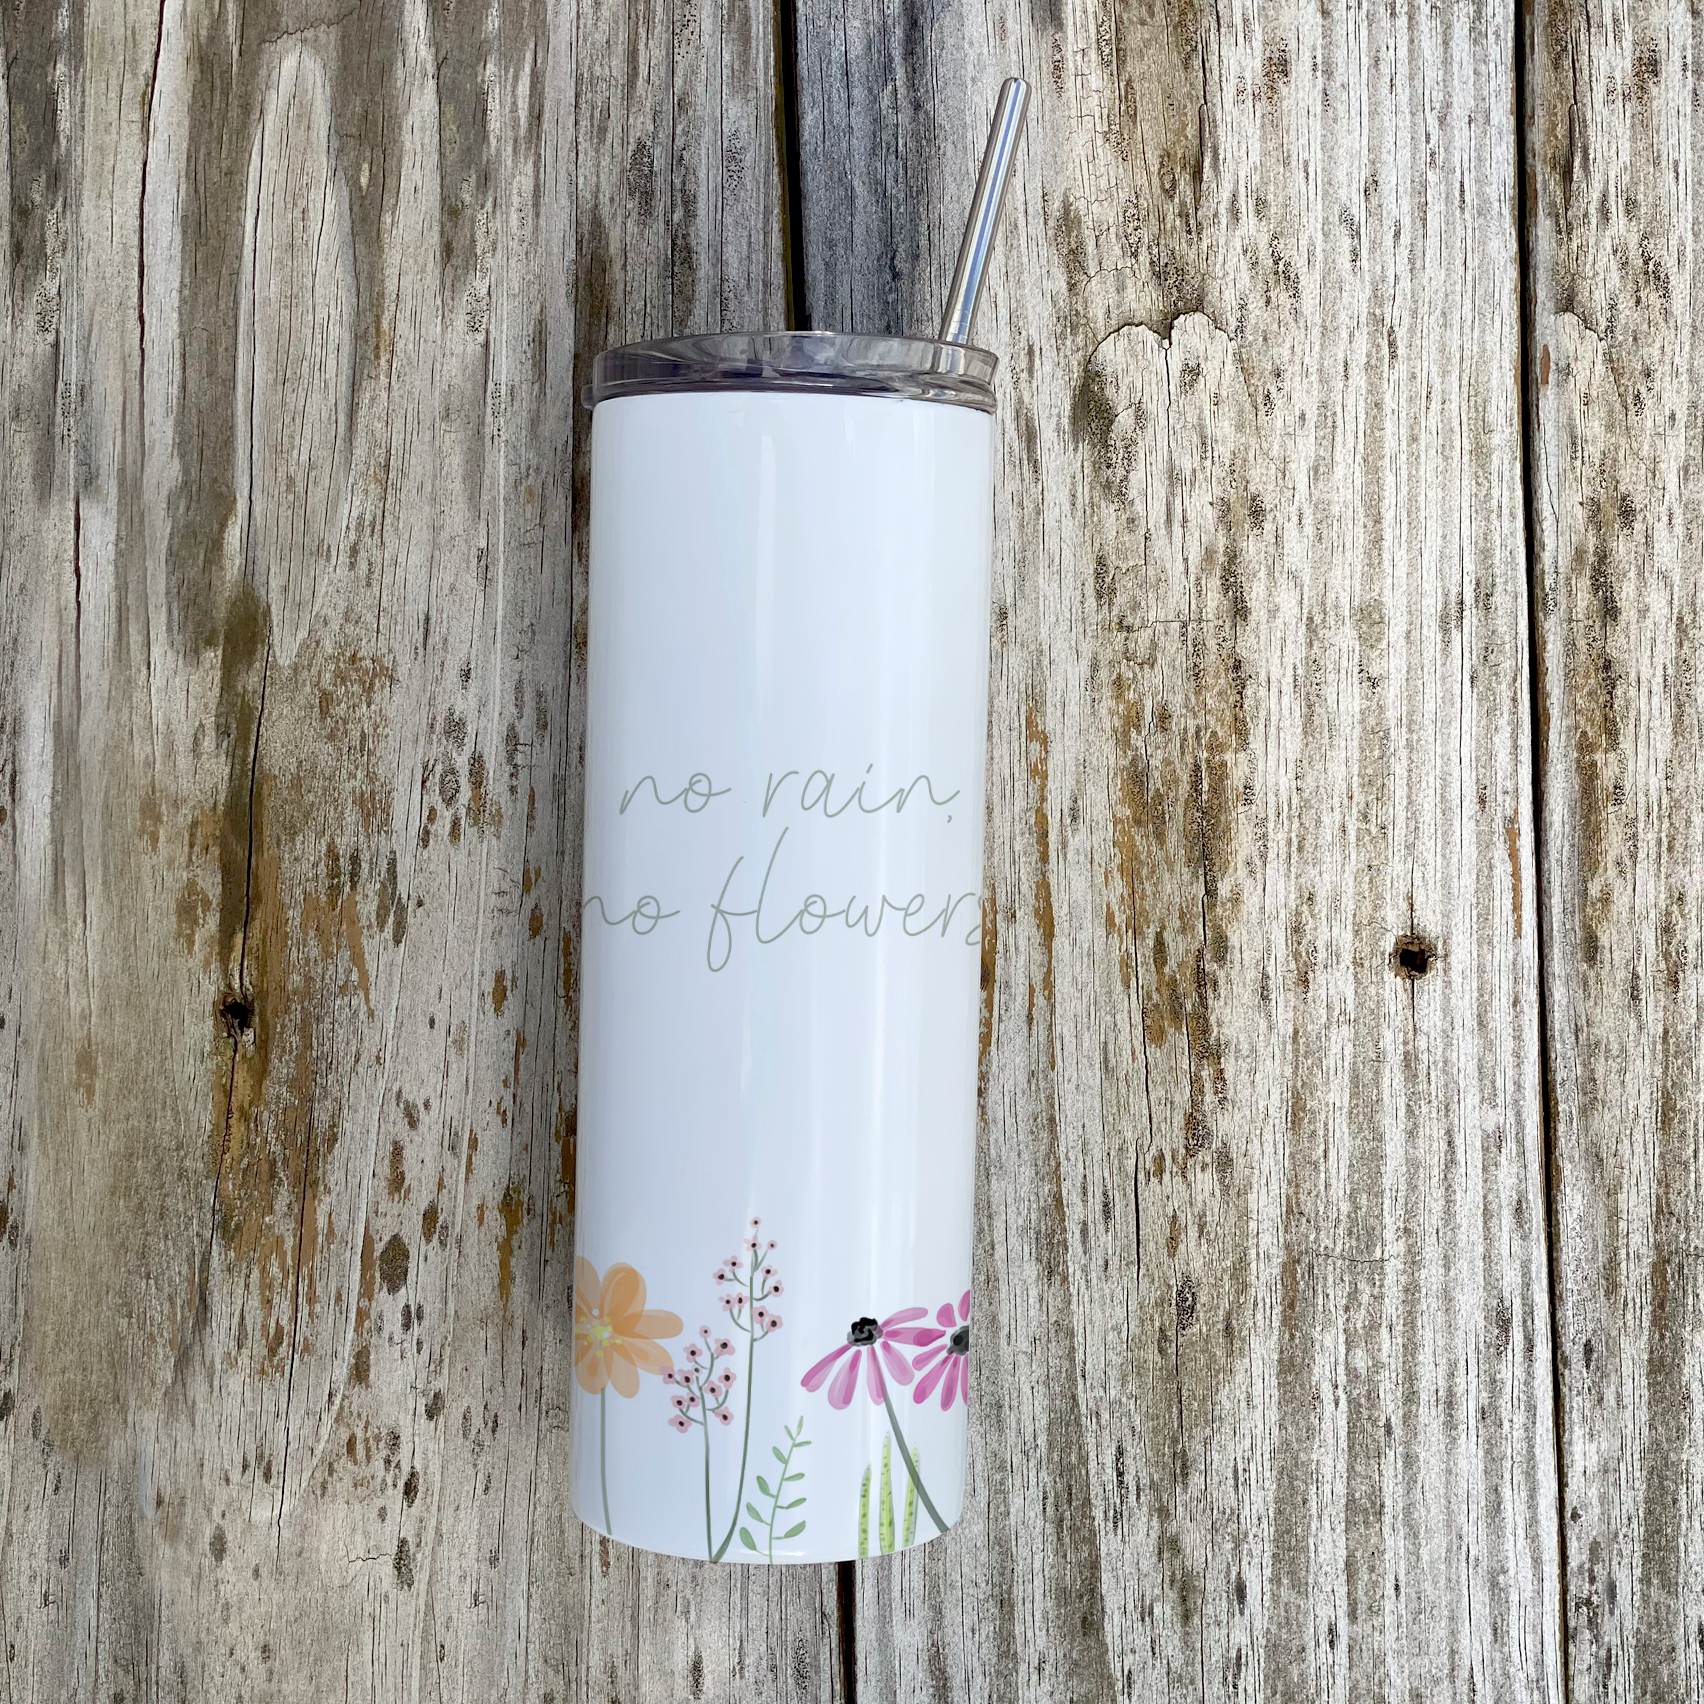 Trend Setters Originals (No Rain, No Flowers) 20 Oz Stainless Steel Travel Tumbler with Straw